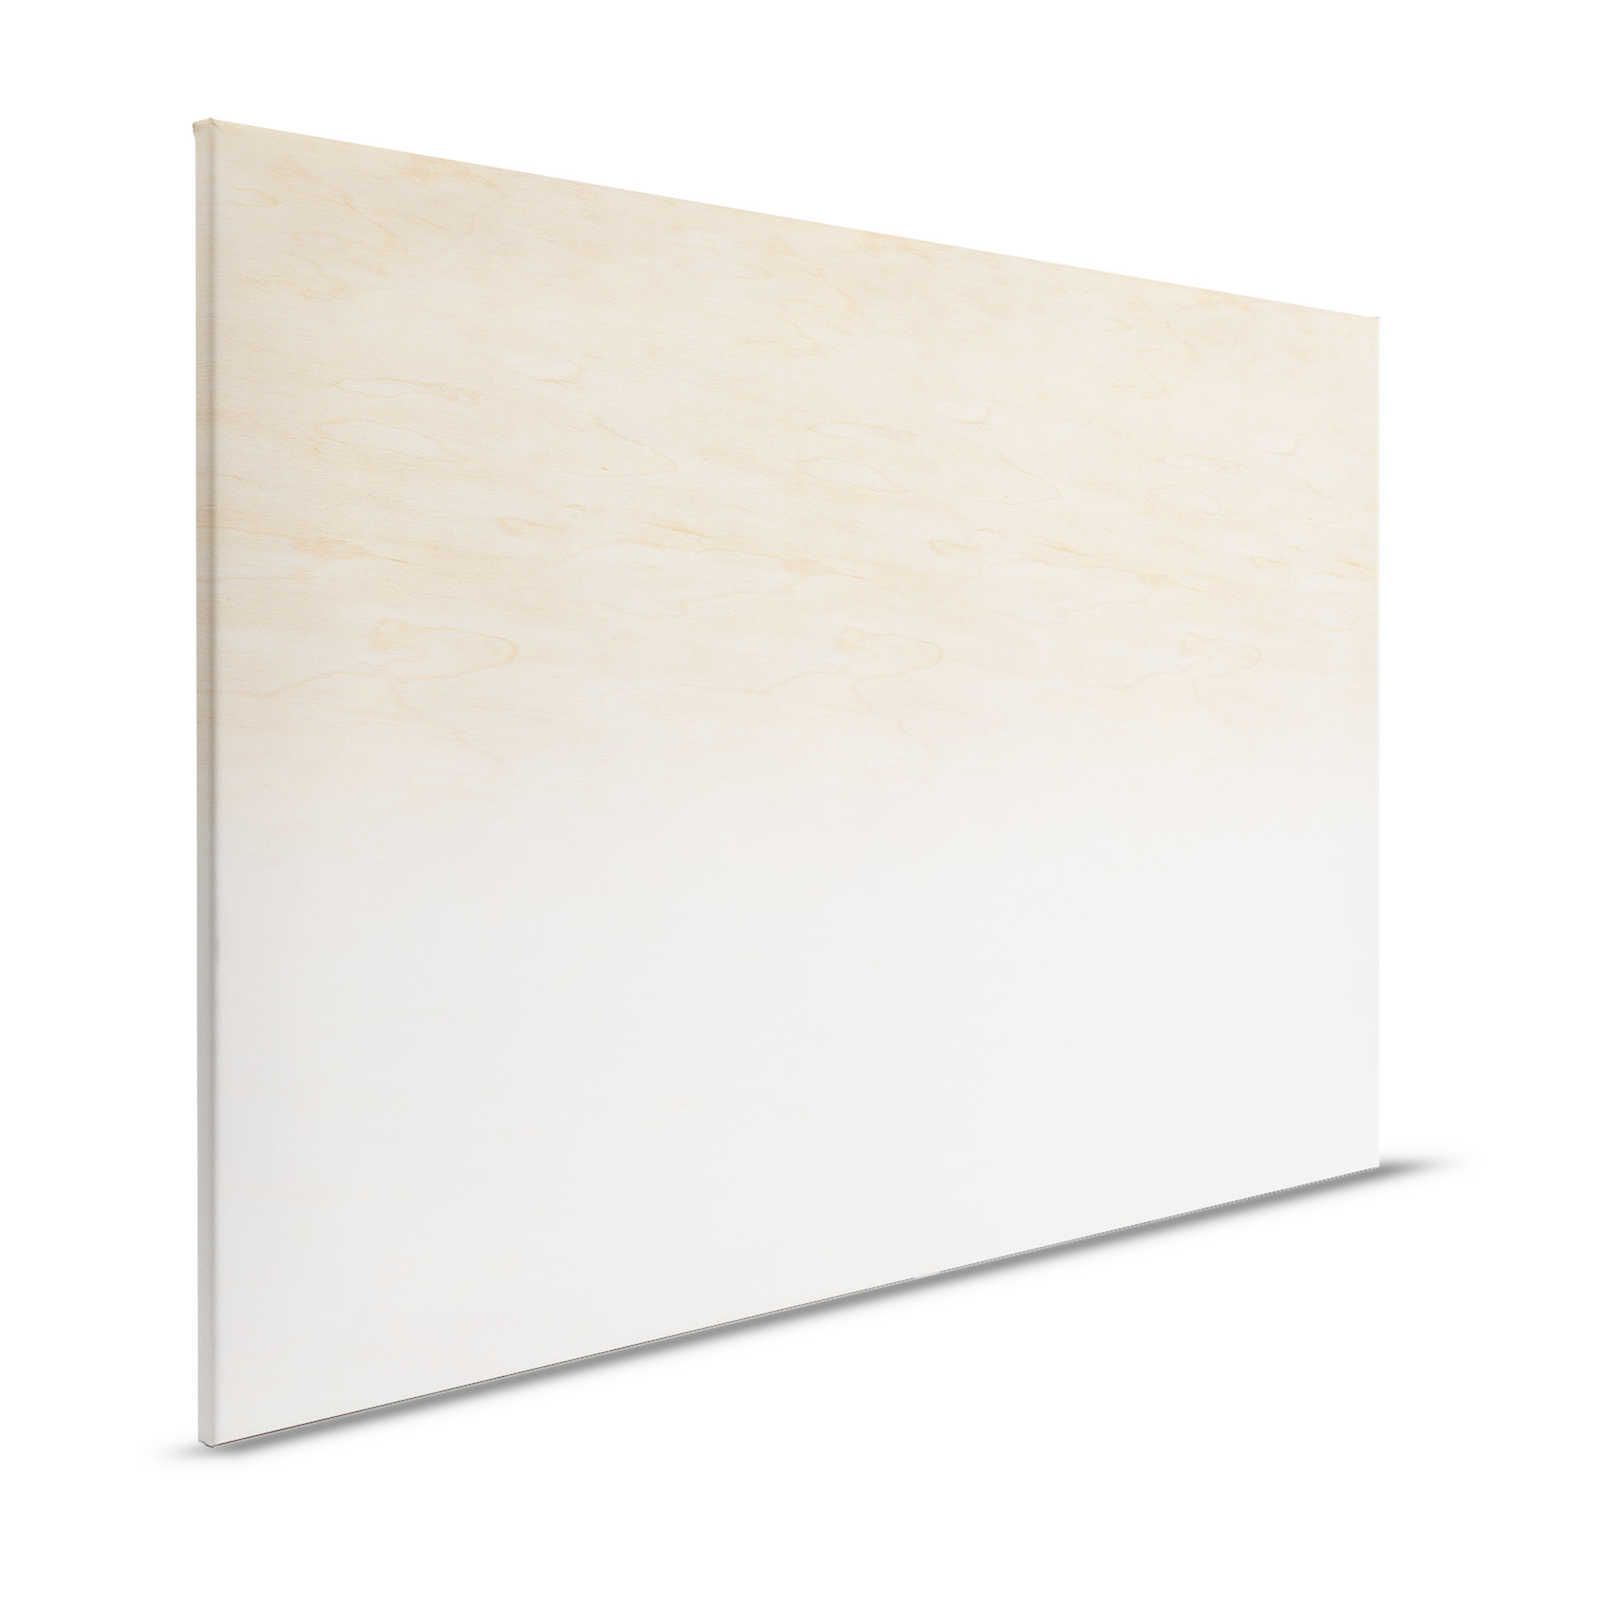 Workshop 3 - Ombre Canvas Painting Beige & White with Wood Grain - 1.20 m x 0.80 m
